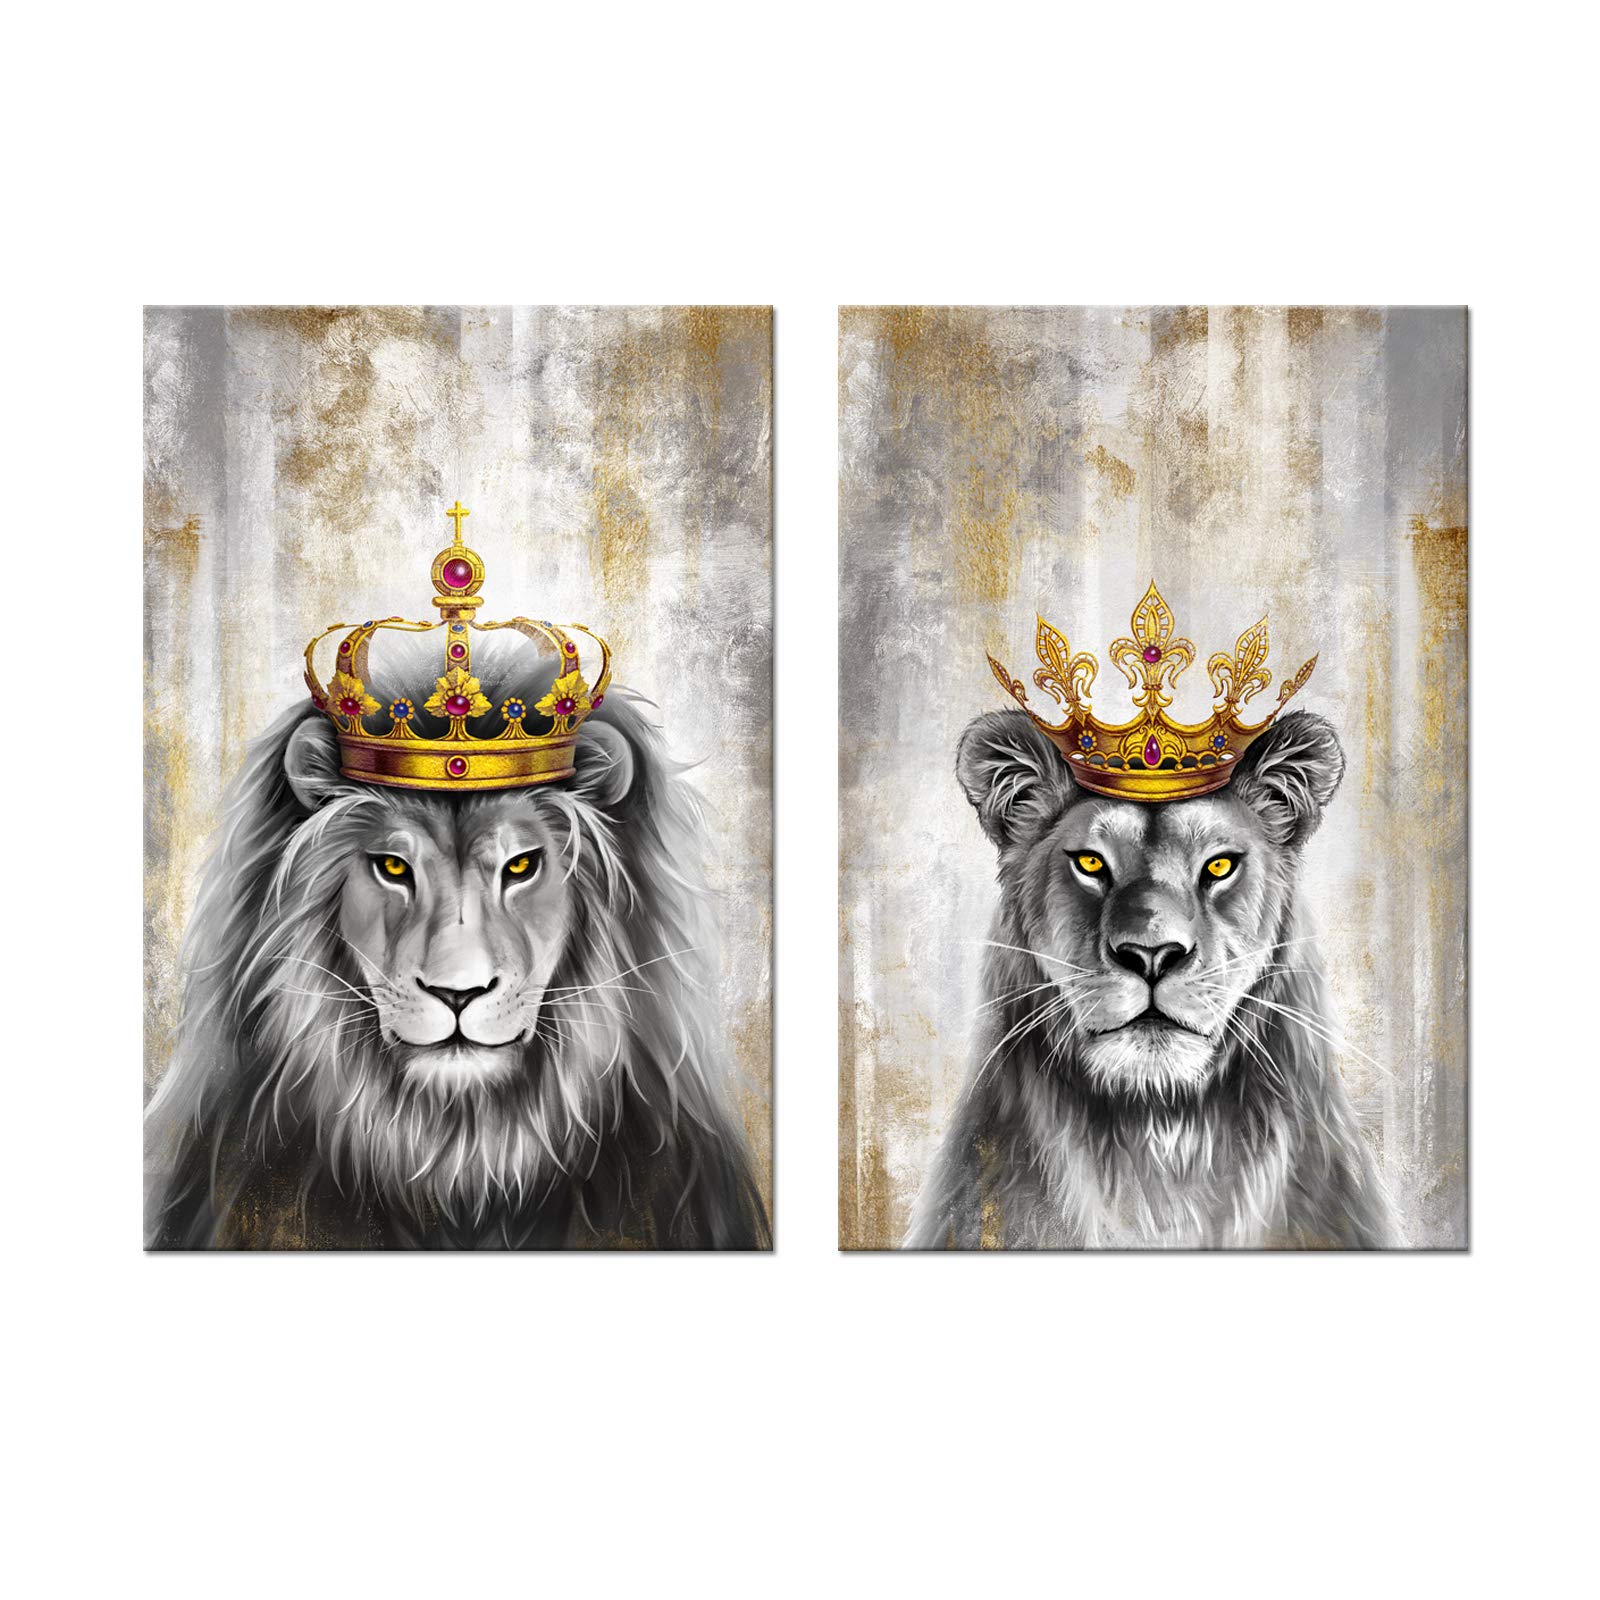 Zlove 2 Pieces Animal King Wall Art Lion and Lioness with Crown Grey and Gold Romantic Couple Artwork for Bedroom Modern Home Decoration Stretched ...